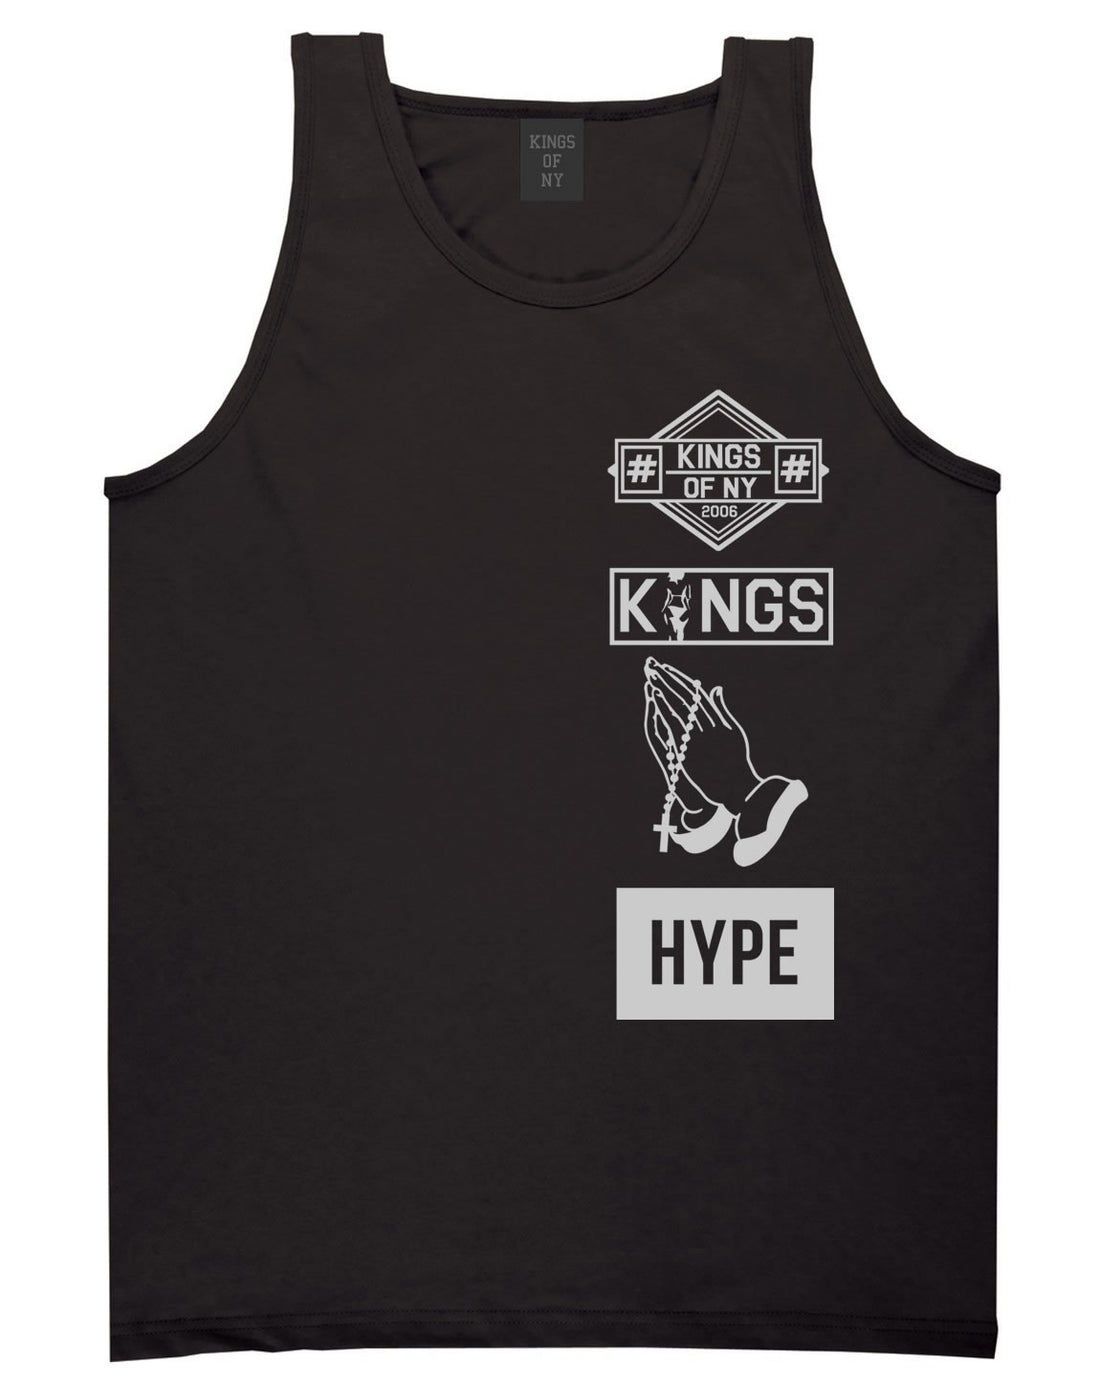 Prayer Hands Hype Left Logos Tank Top in Black By Kings Of NY